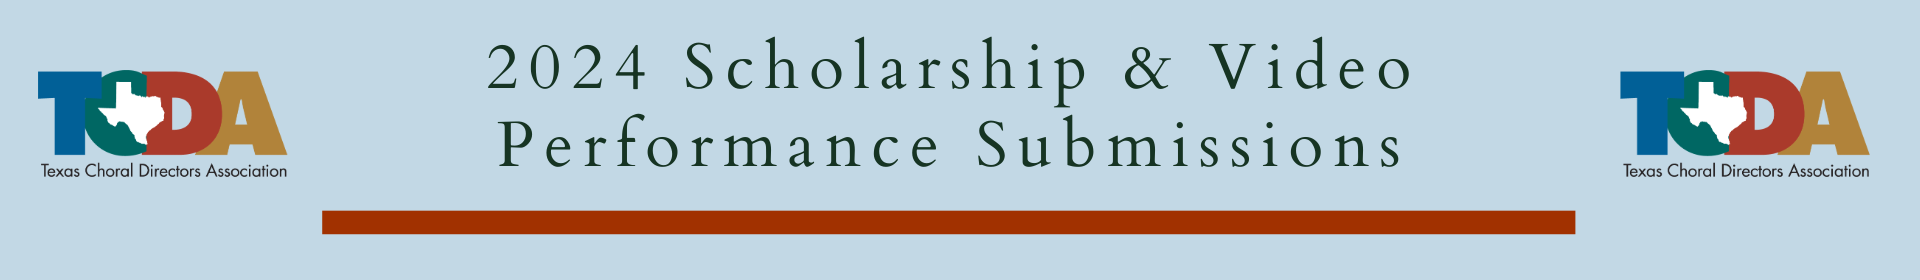 TCDA 2024 Scholarship Application Submissions Event Banner